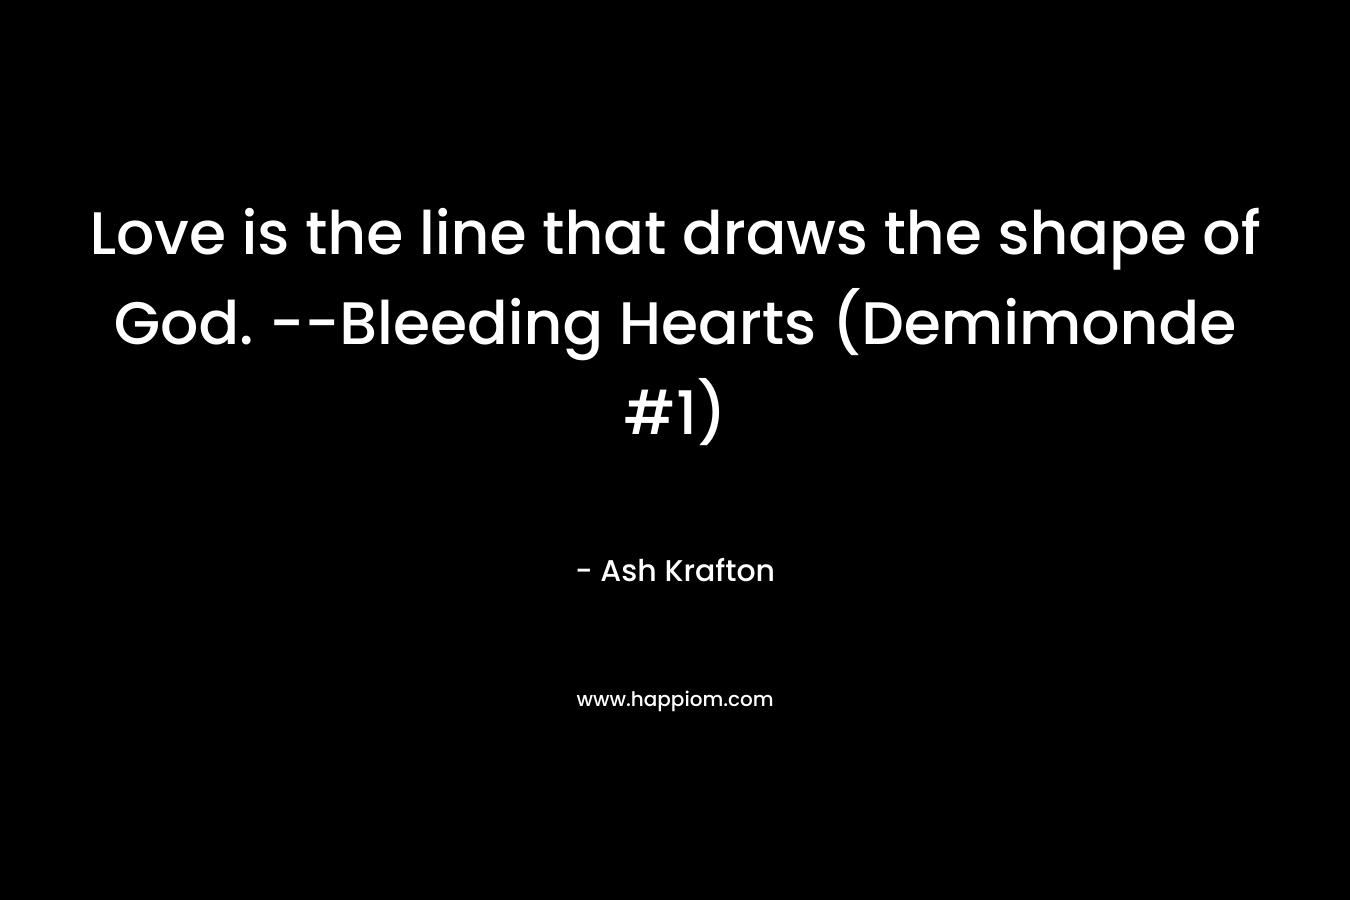 Love is the line that draws the shape of God. --Bleeding Hearts (Demimonde #1)